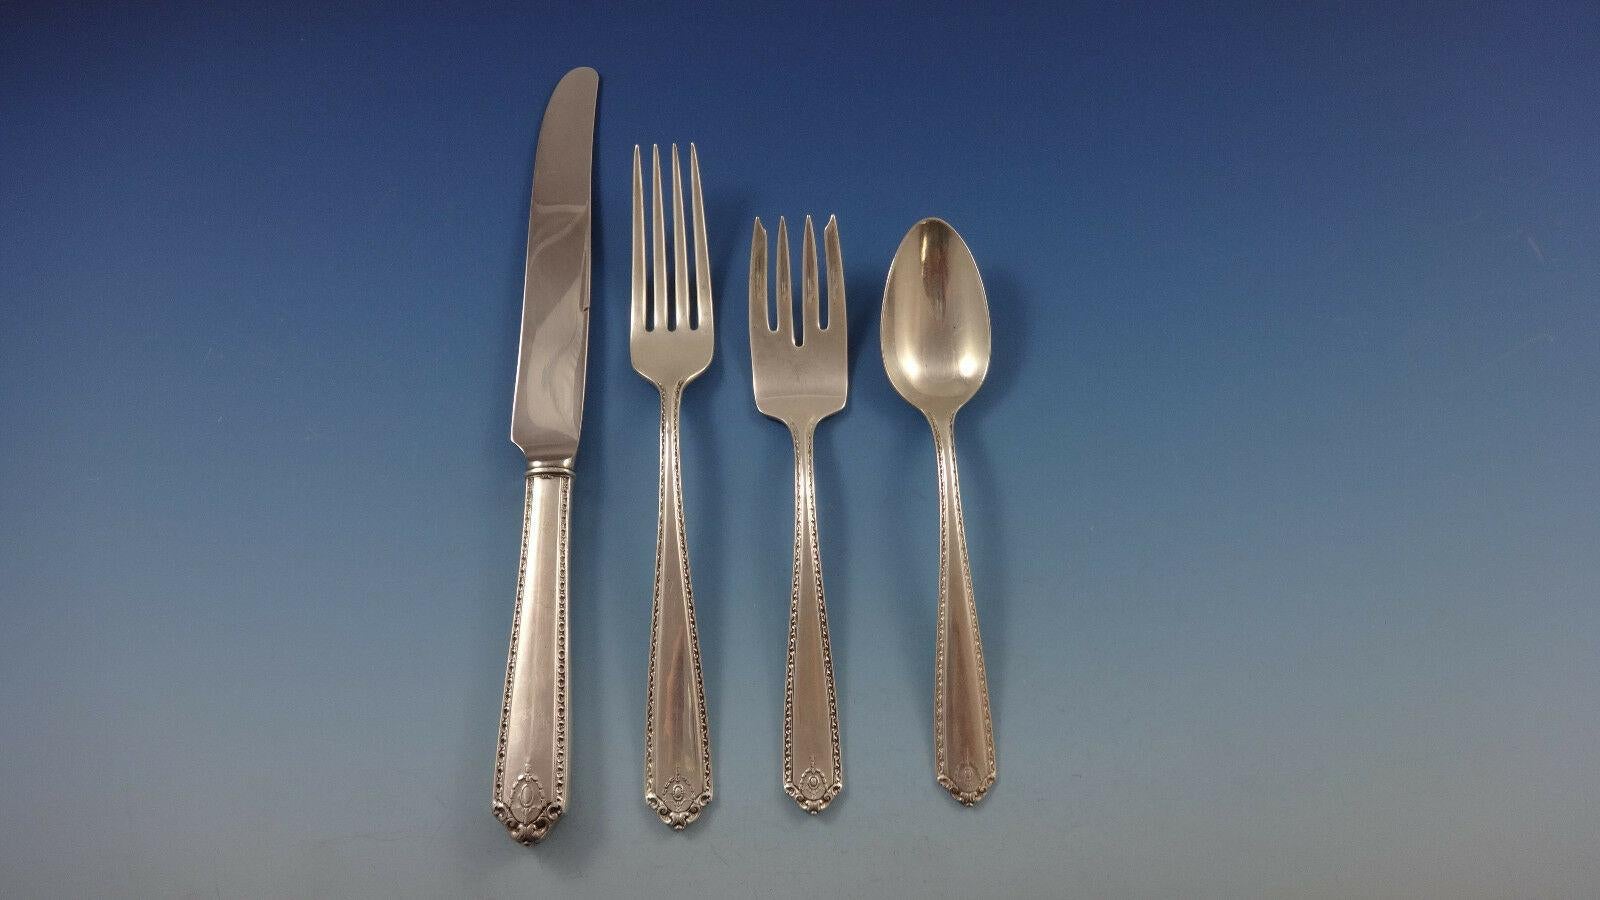 Lady Hilton by Westmorland Sterling Silver flatware set, 37 pieces. This set includes:

8 knives, 8 3/4